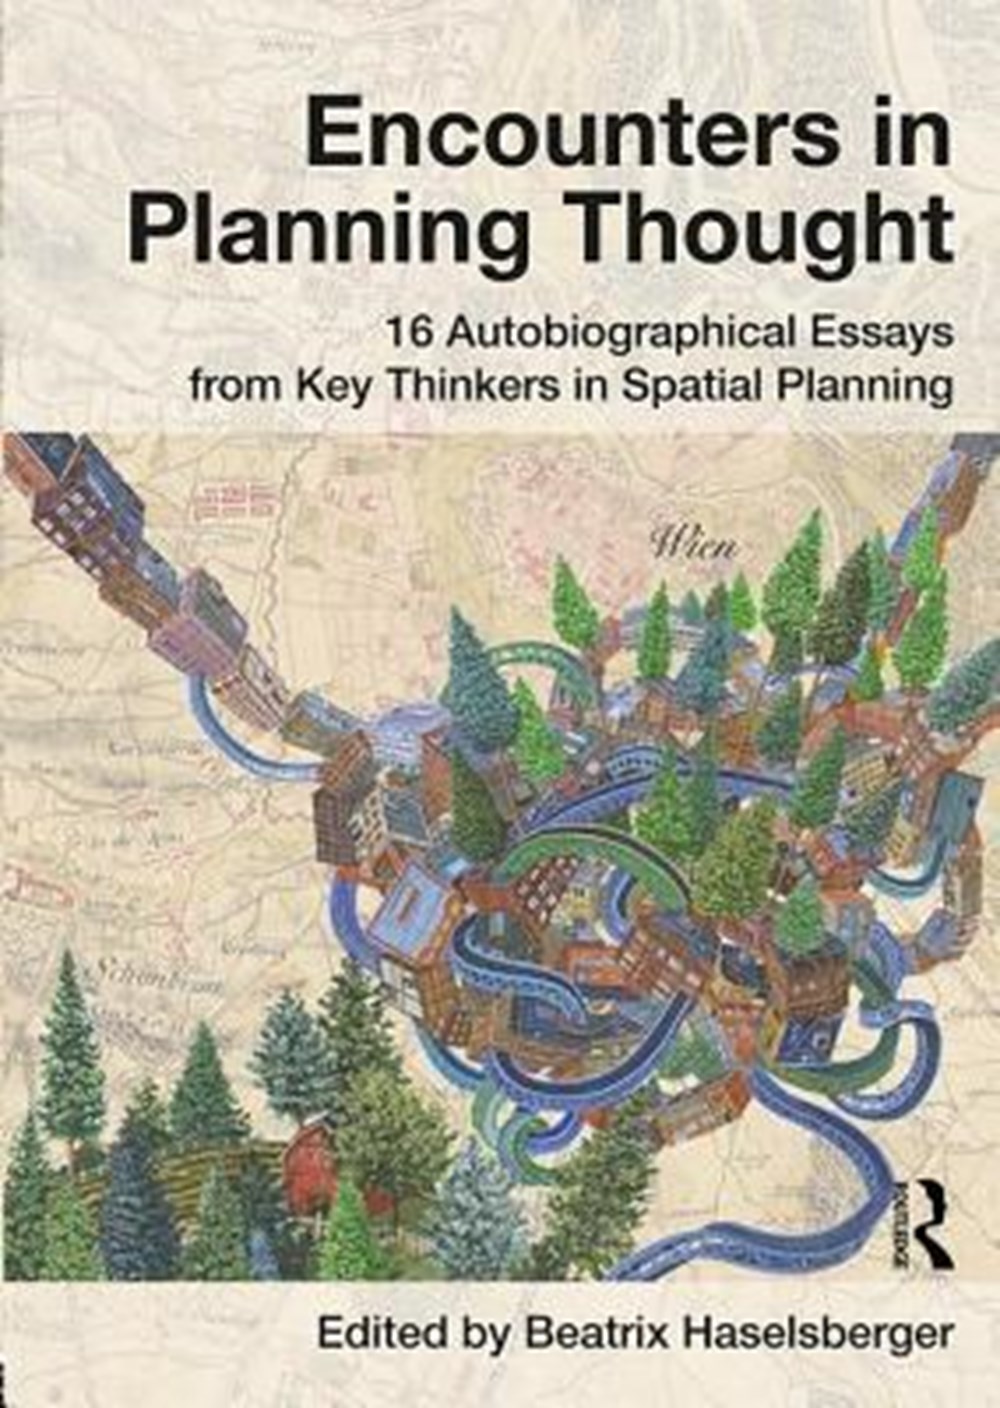 Encounters in Planning Thought 16 Autobiographical Essays from Key Thinkers in Spatial Planning